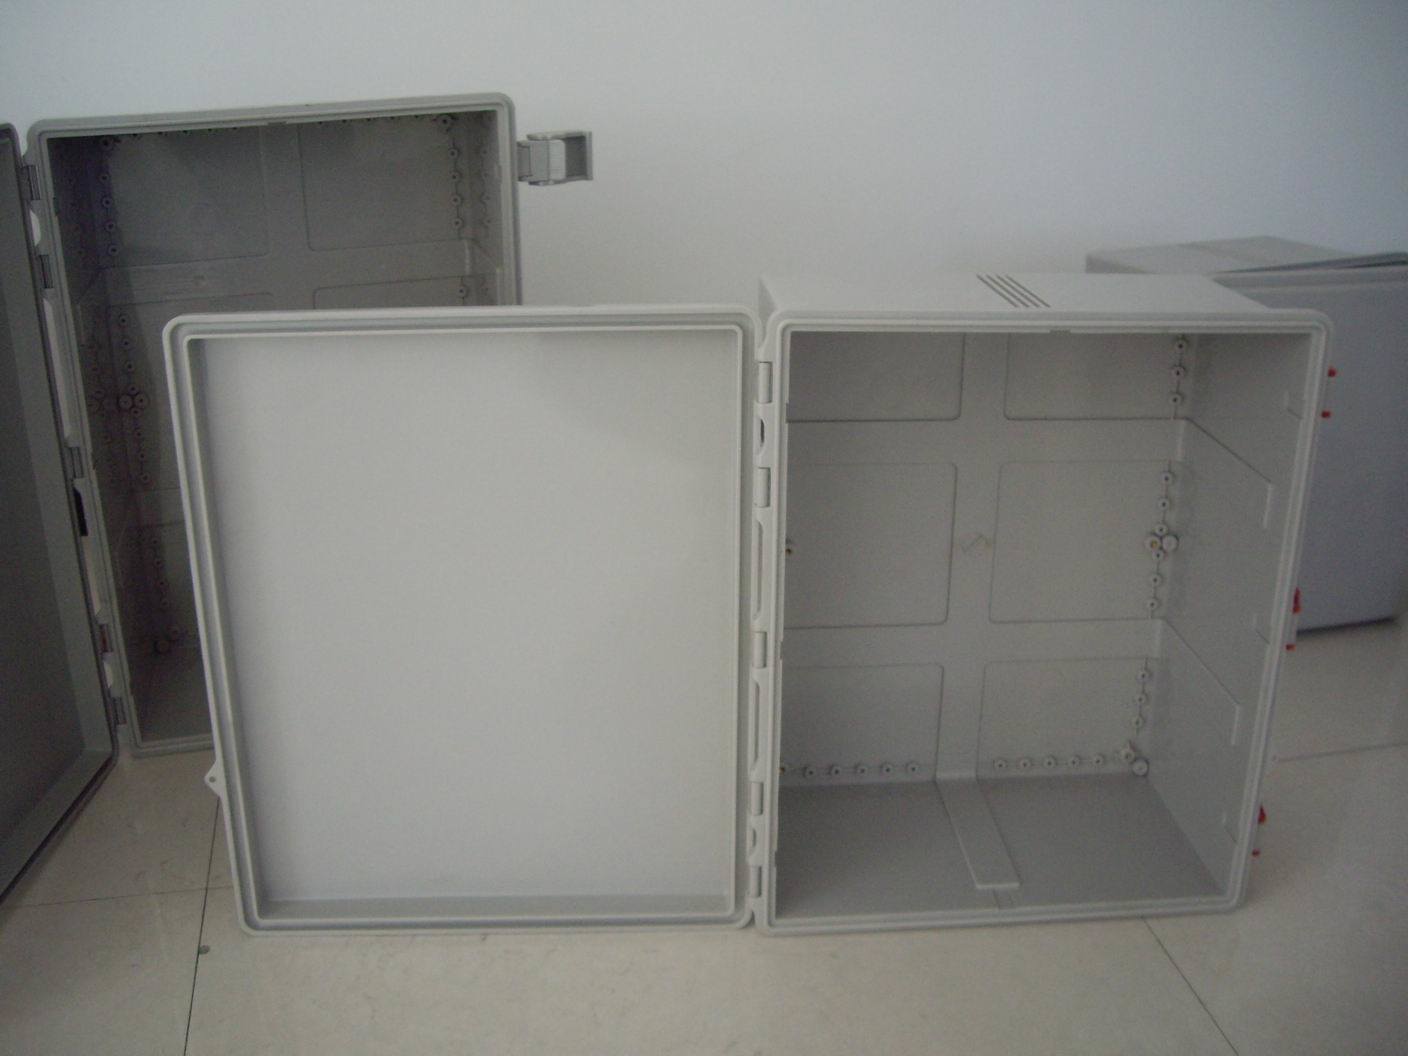 Waterproof Connector Box, Mould